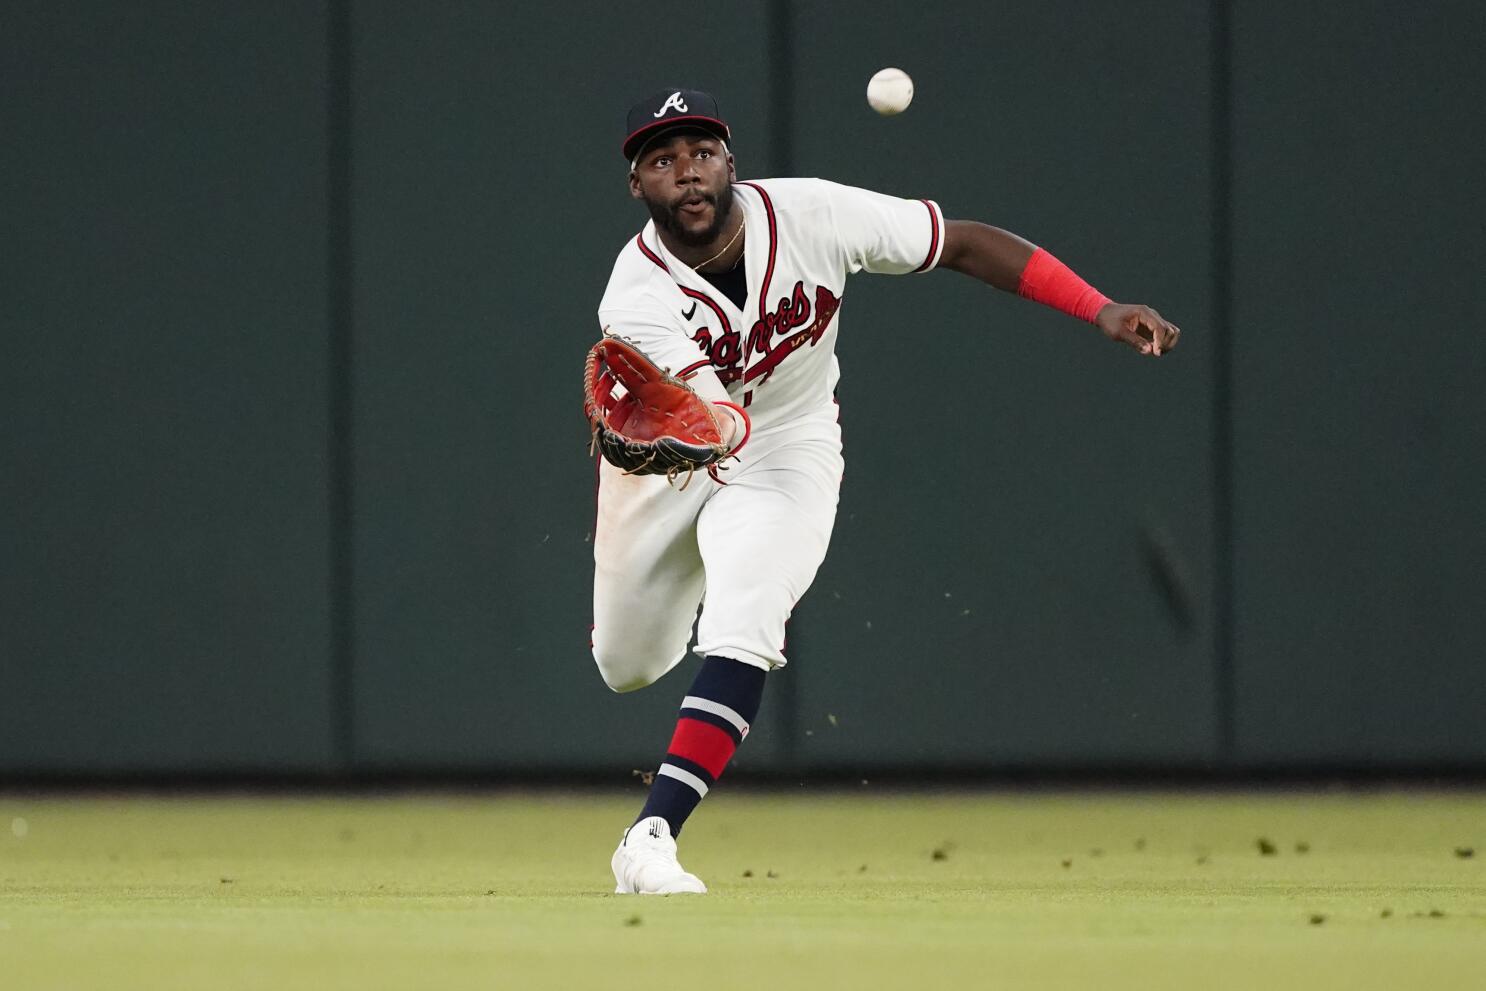 Braves sign Michael Harris II to $72 million, 8-year contract